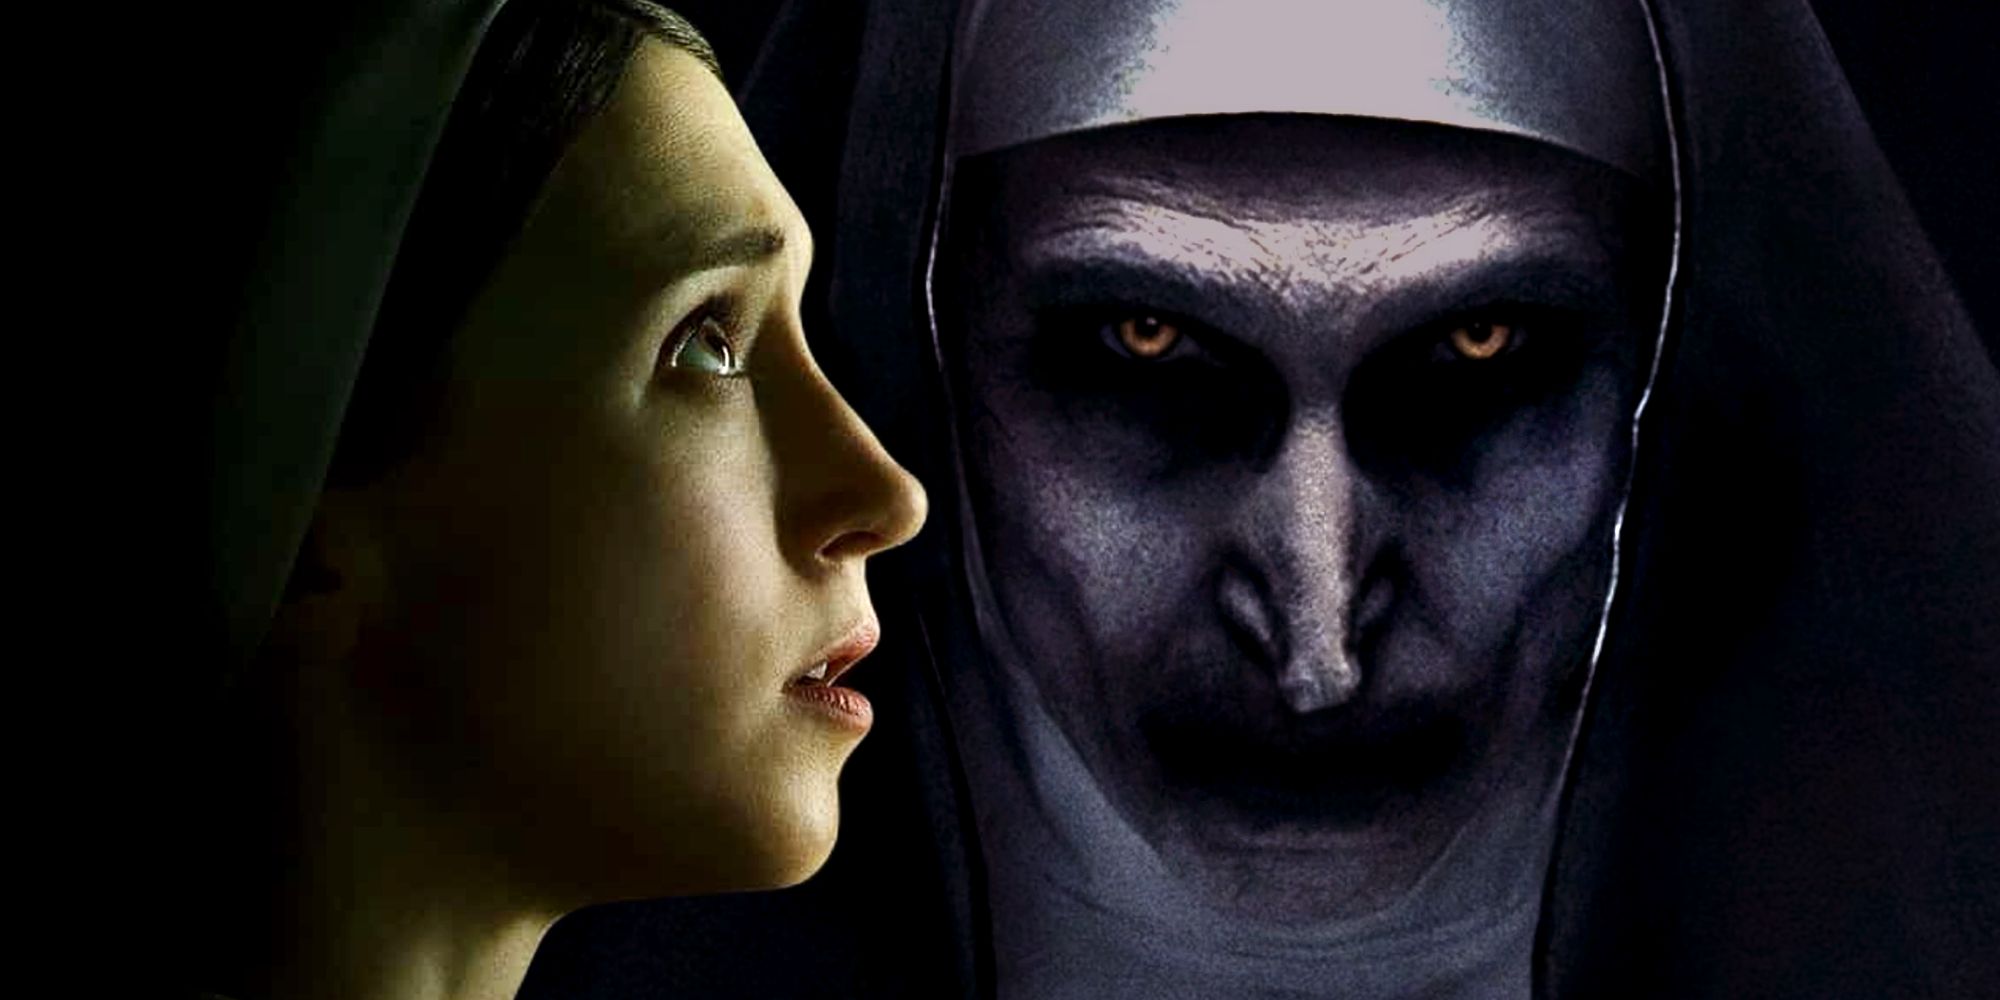 The Nun 2’s Secretly Devastating Maurice Ending Was Intentional, Says Director